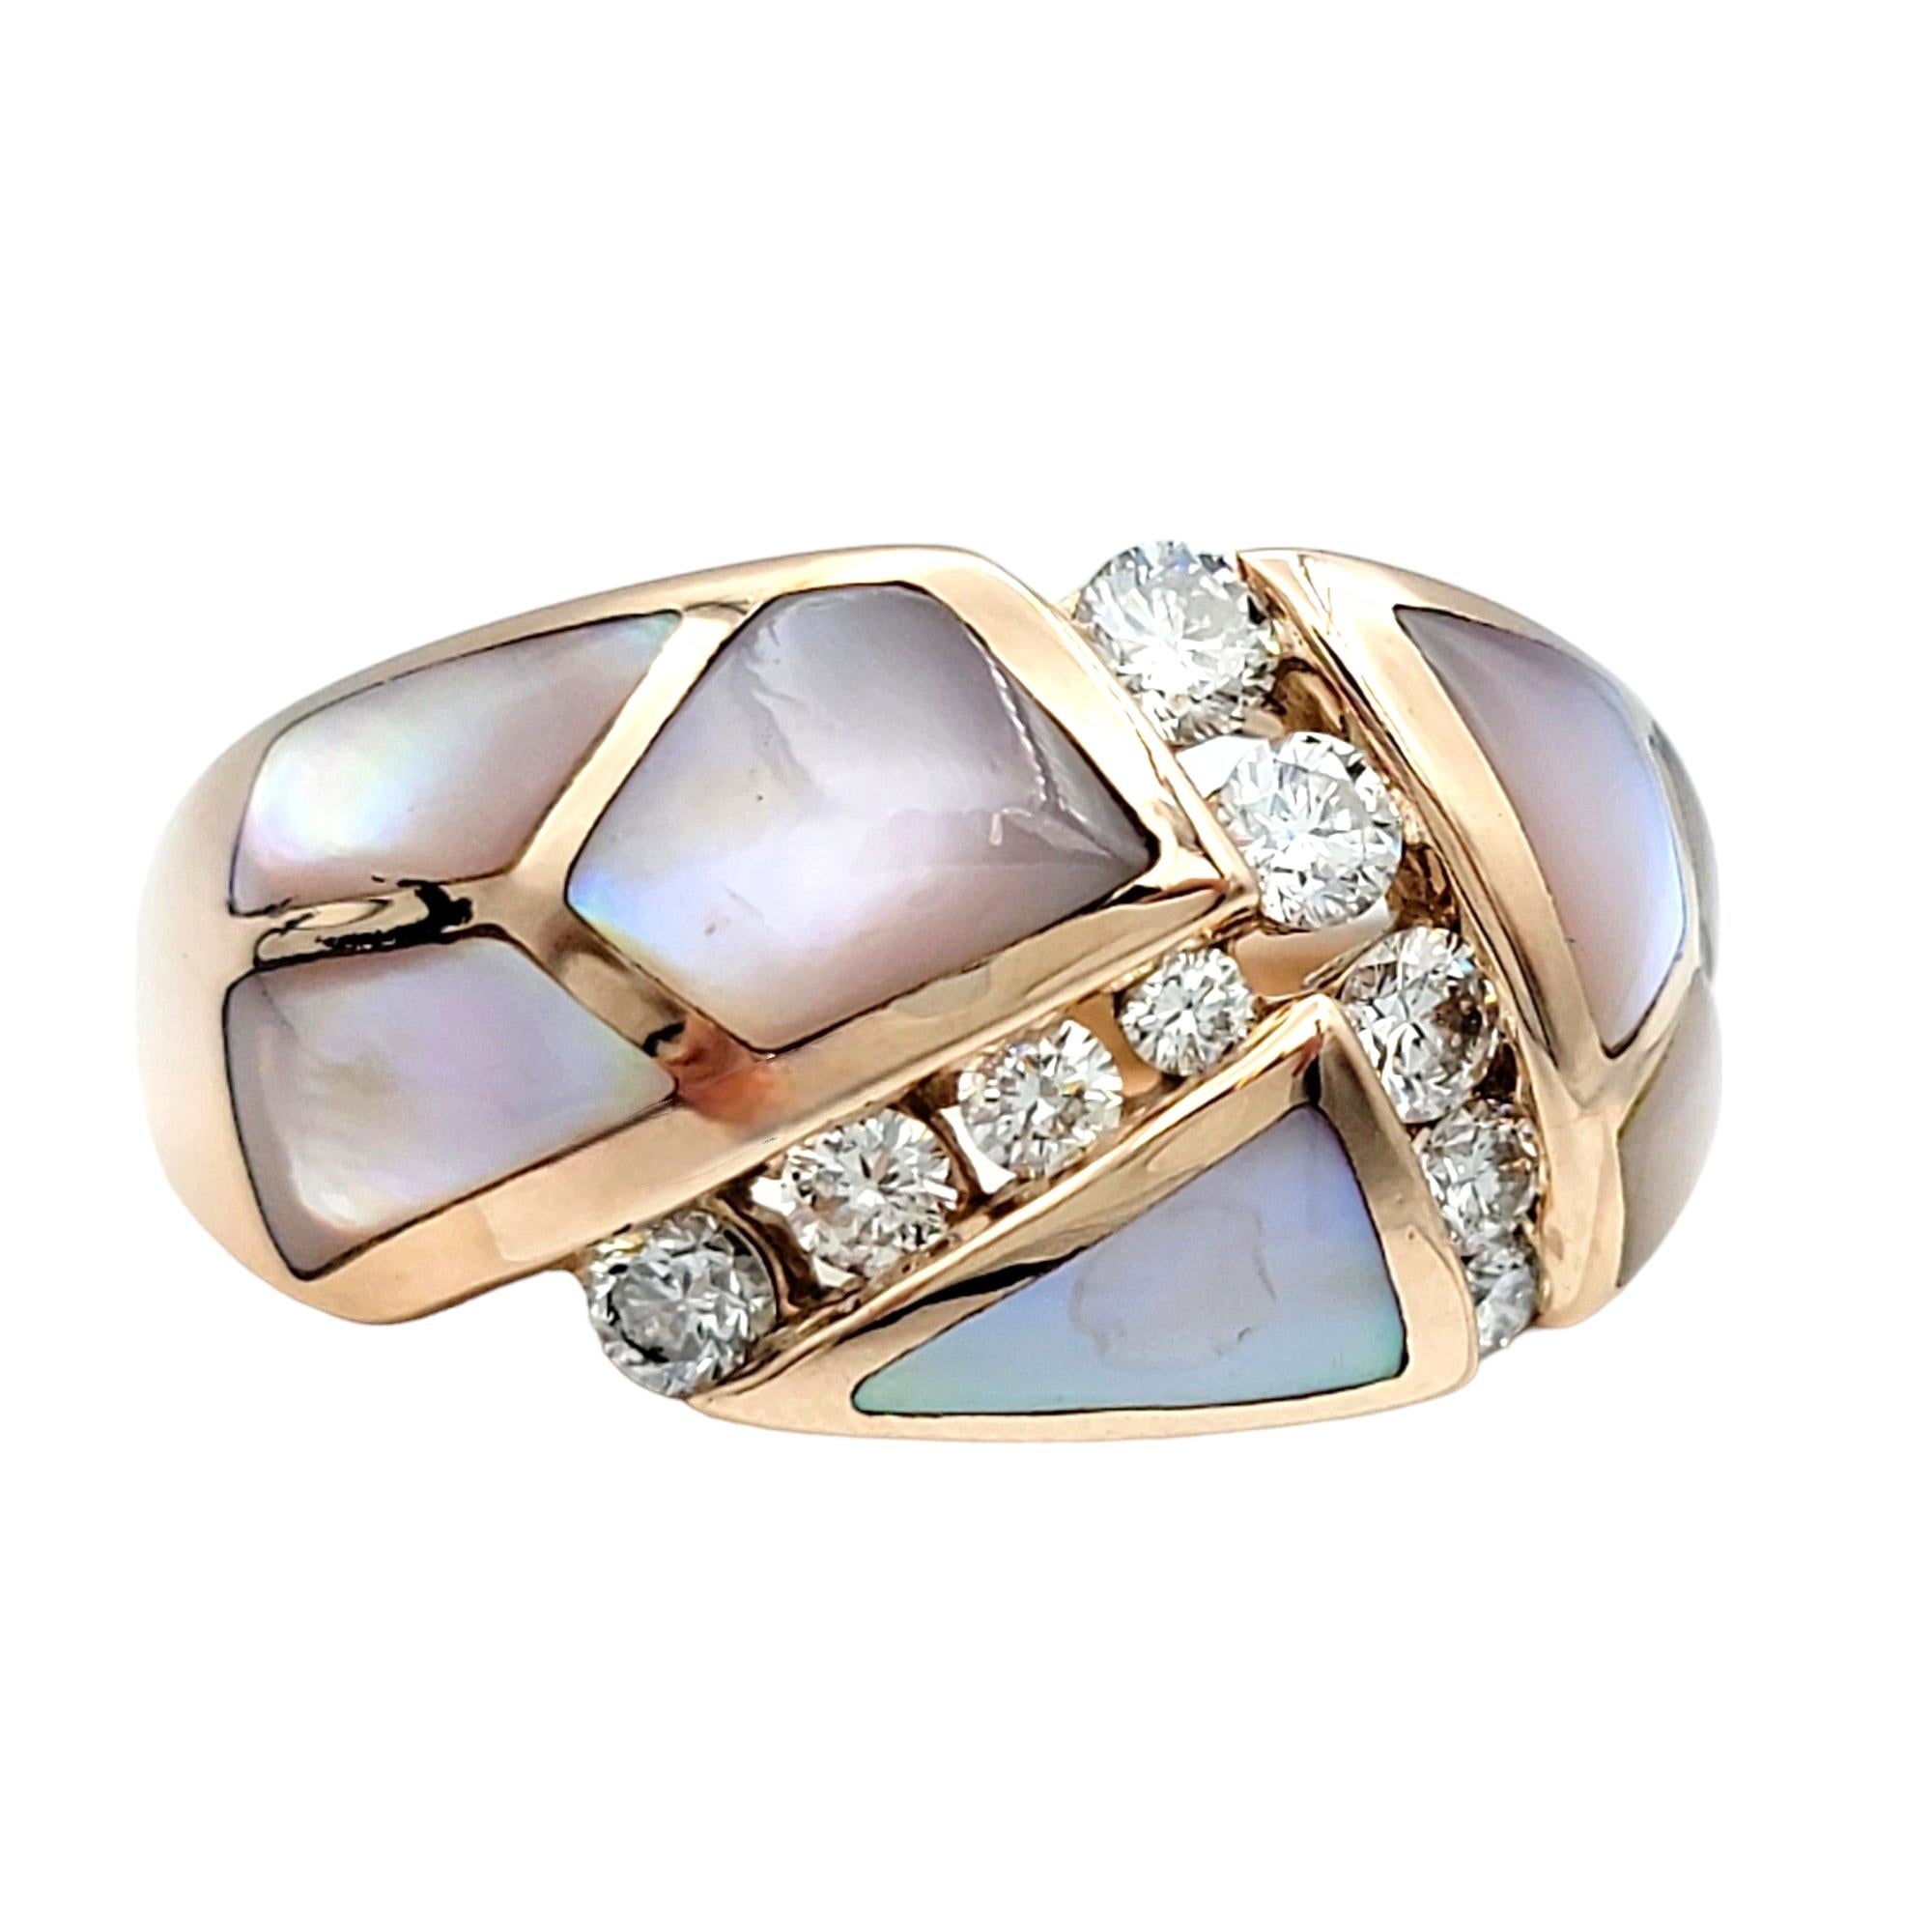 Ring Size: 7.75

This stunning band ring set in 14 karat rose gold features a distinctive asymmetrical design that catches the eye with its unconventional elegance. The rose gold setting provides a warm and luxurious backdrop for the arrangement of